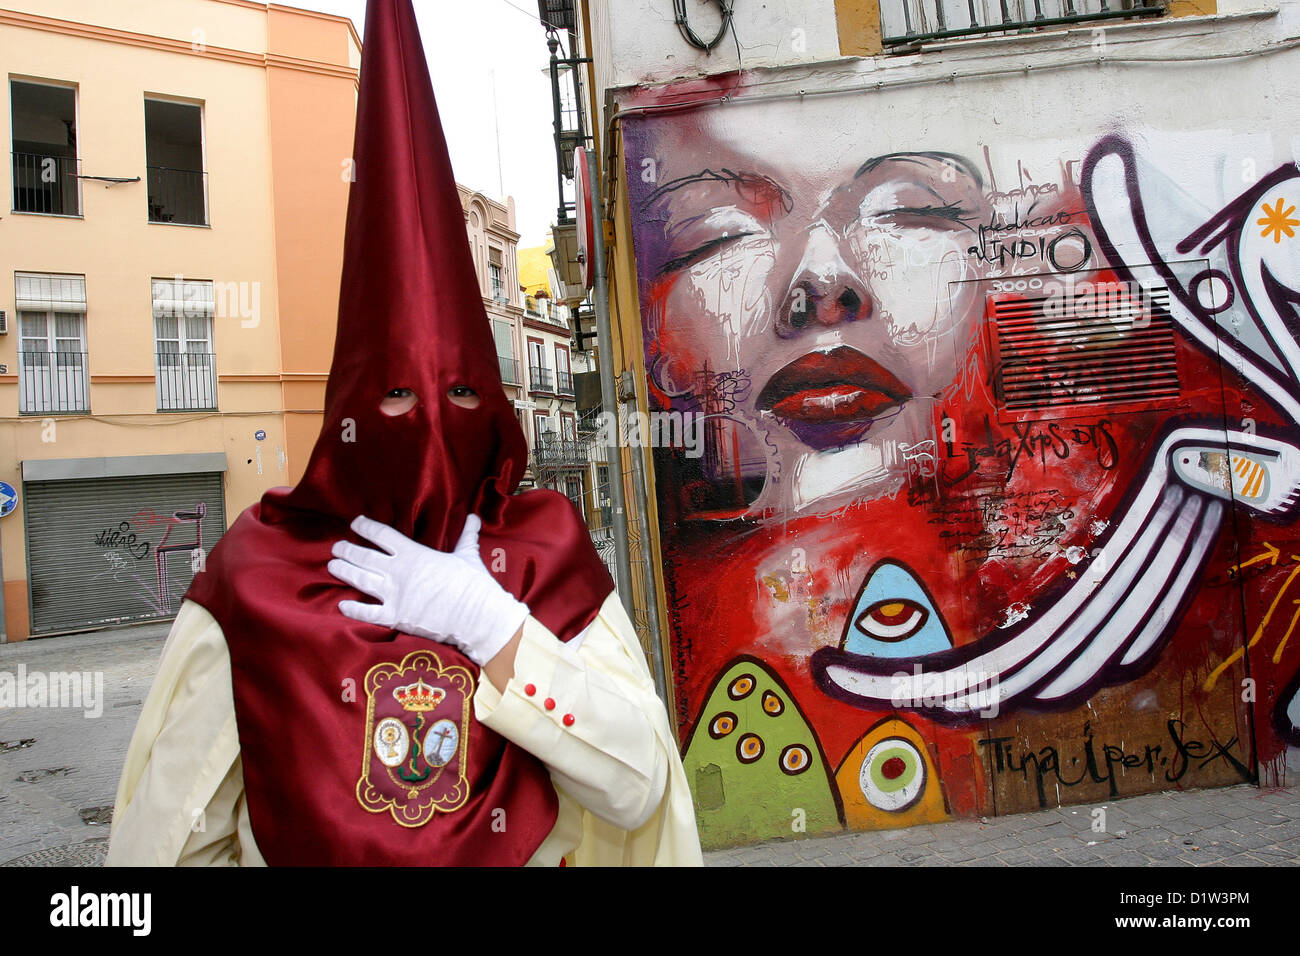 Semana Santa (Holy Week), Fiesta. Celebration in the streets of the old city center of Seville. Andalucia, Southern Spain street art graffiti Stock Photo